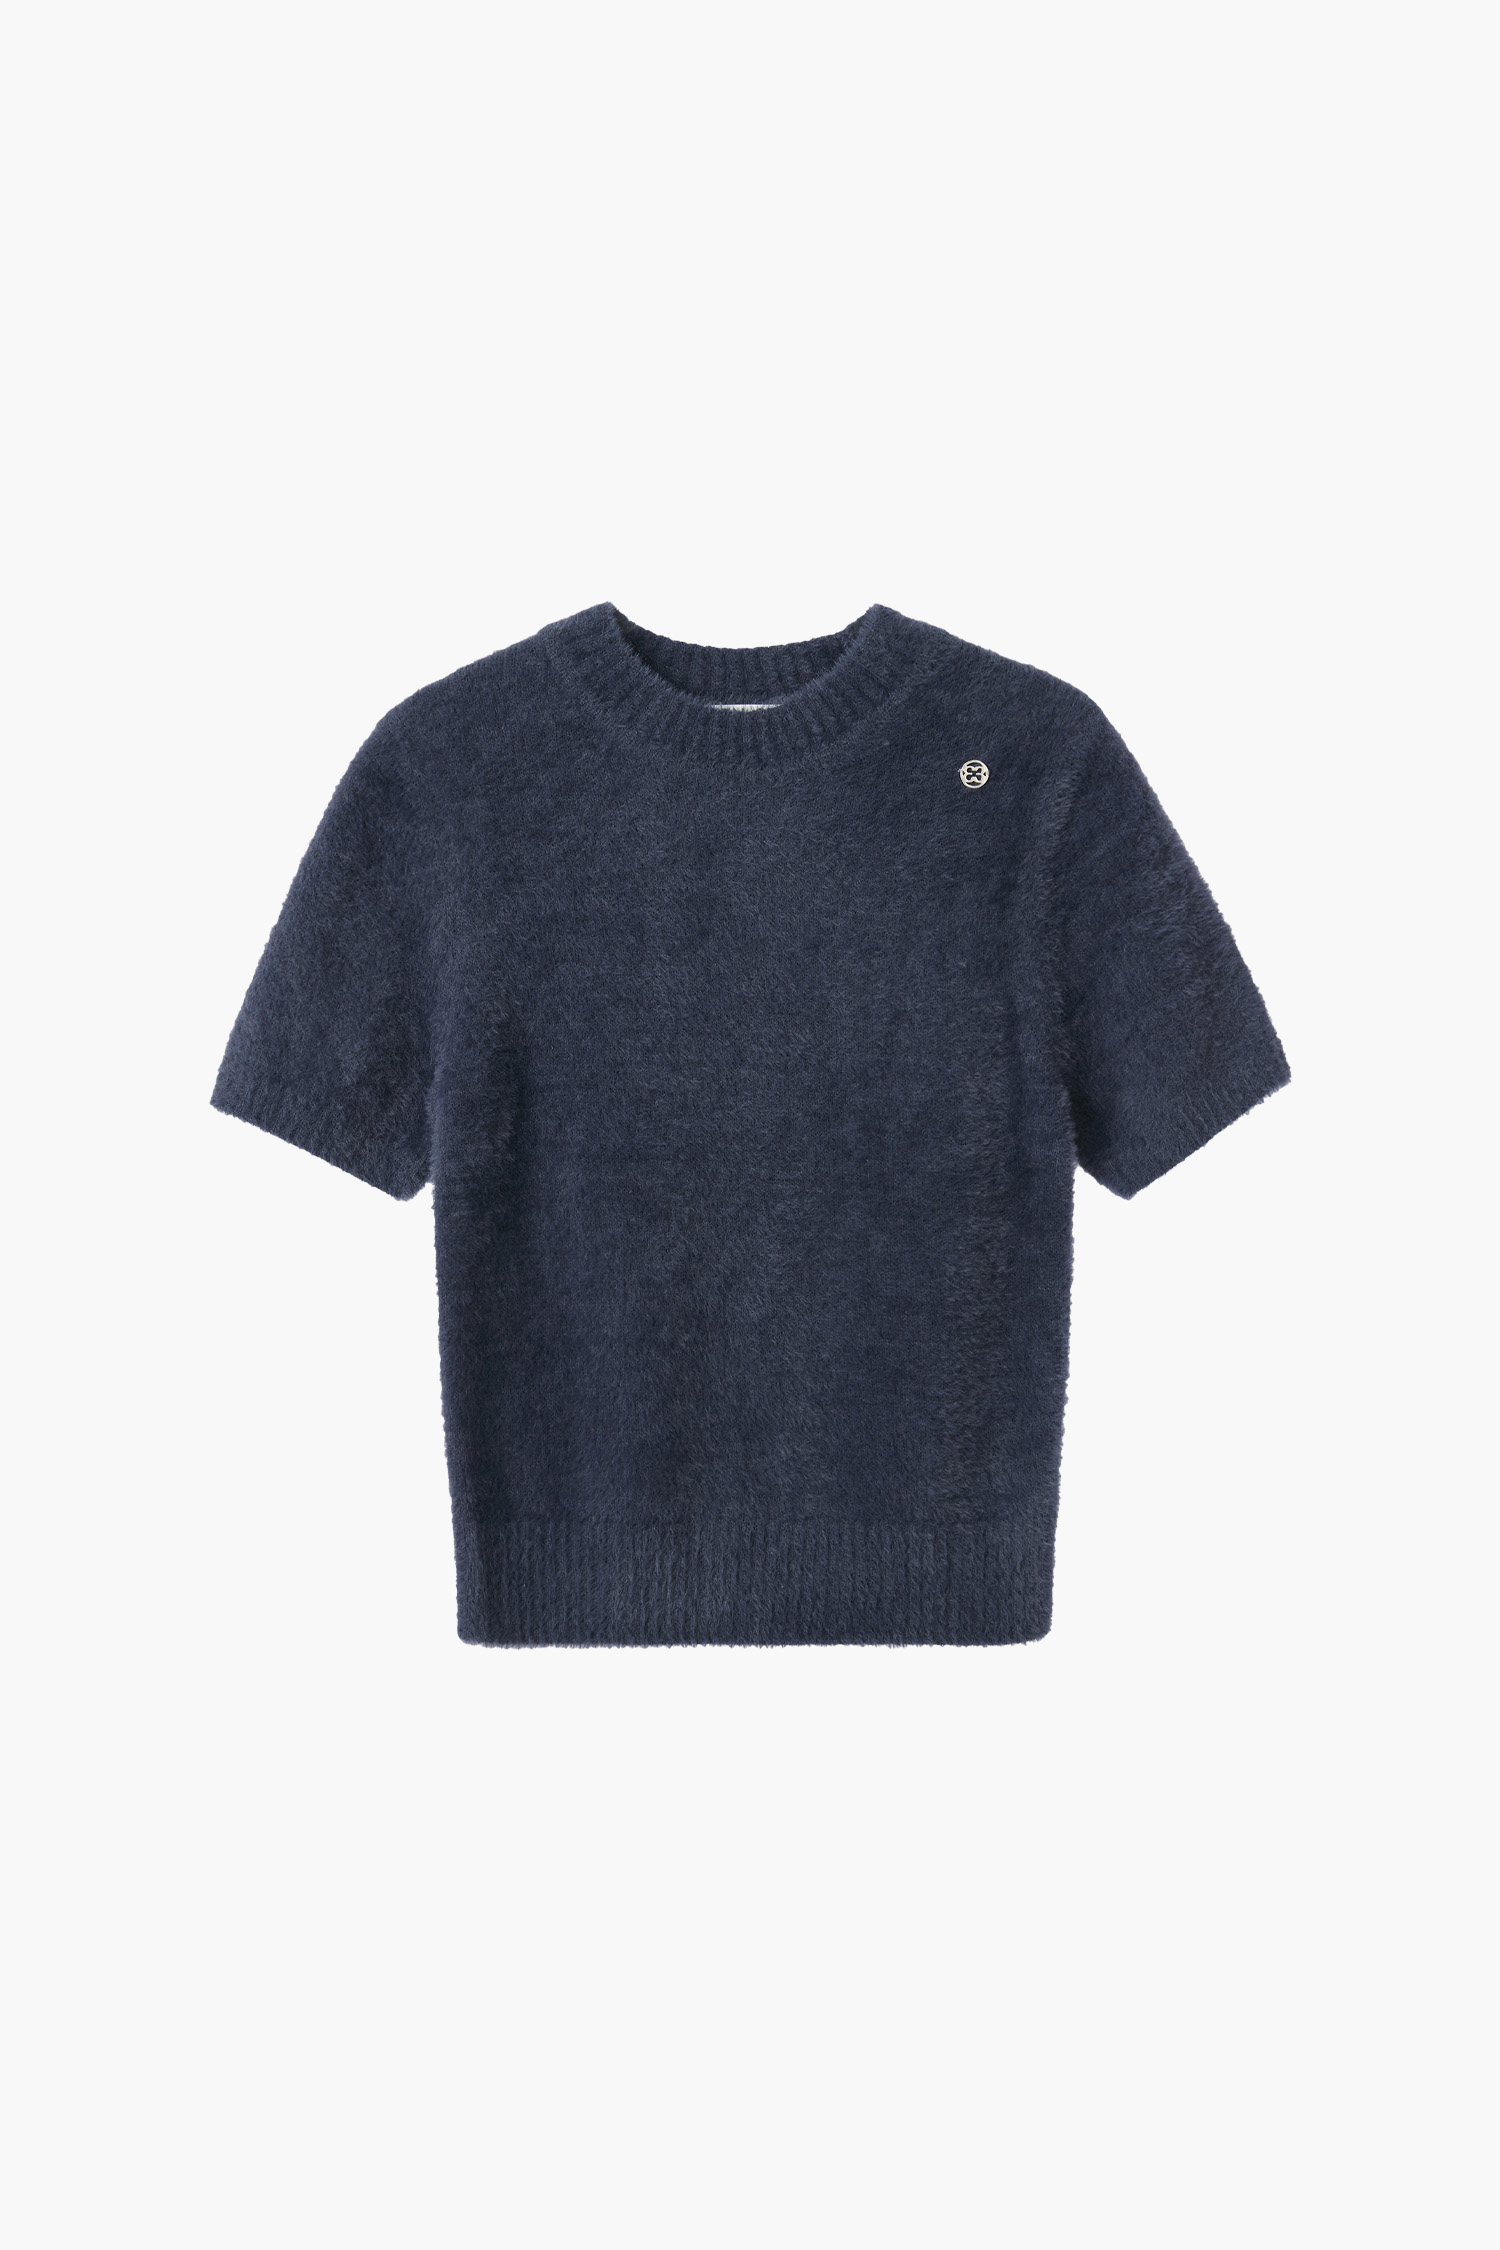 HAIRY KNIT TOP - NAVY